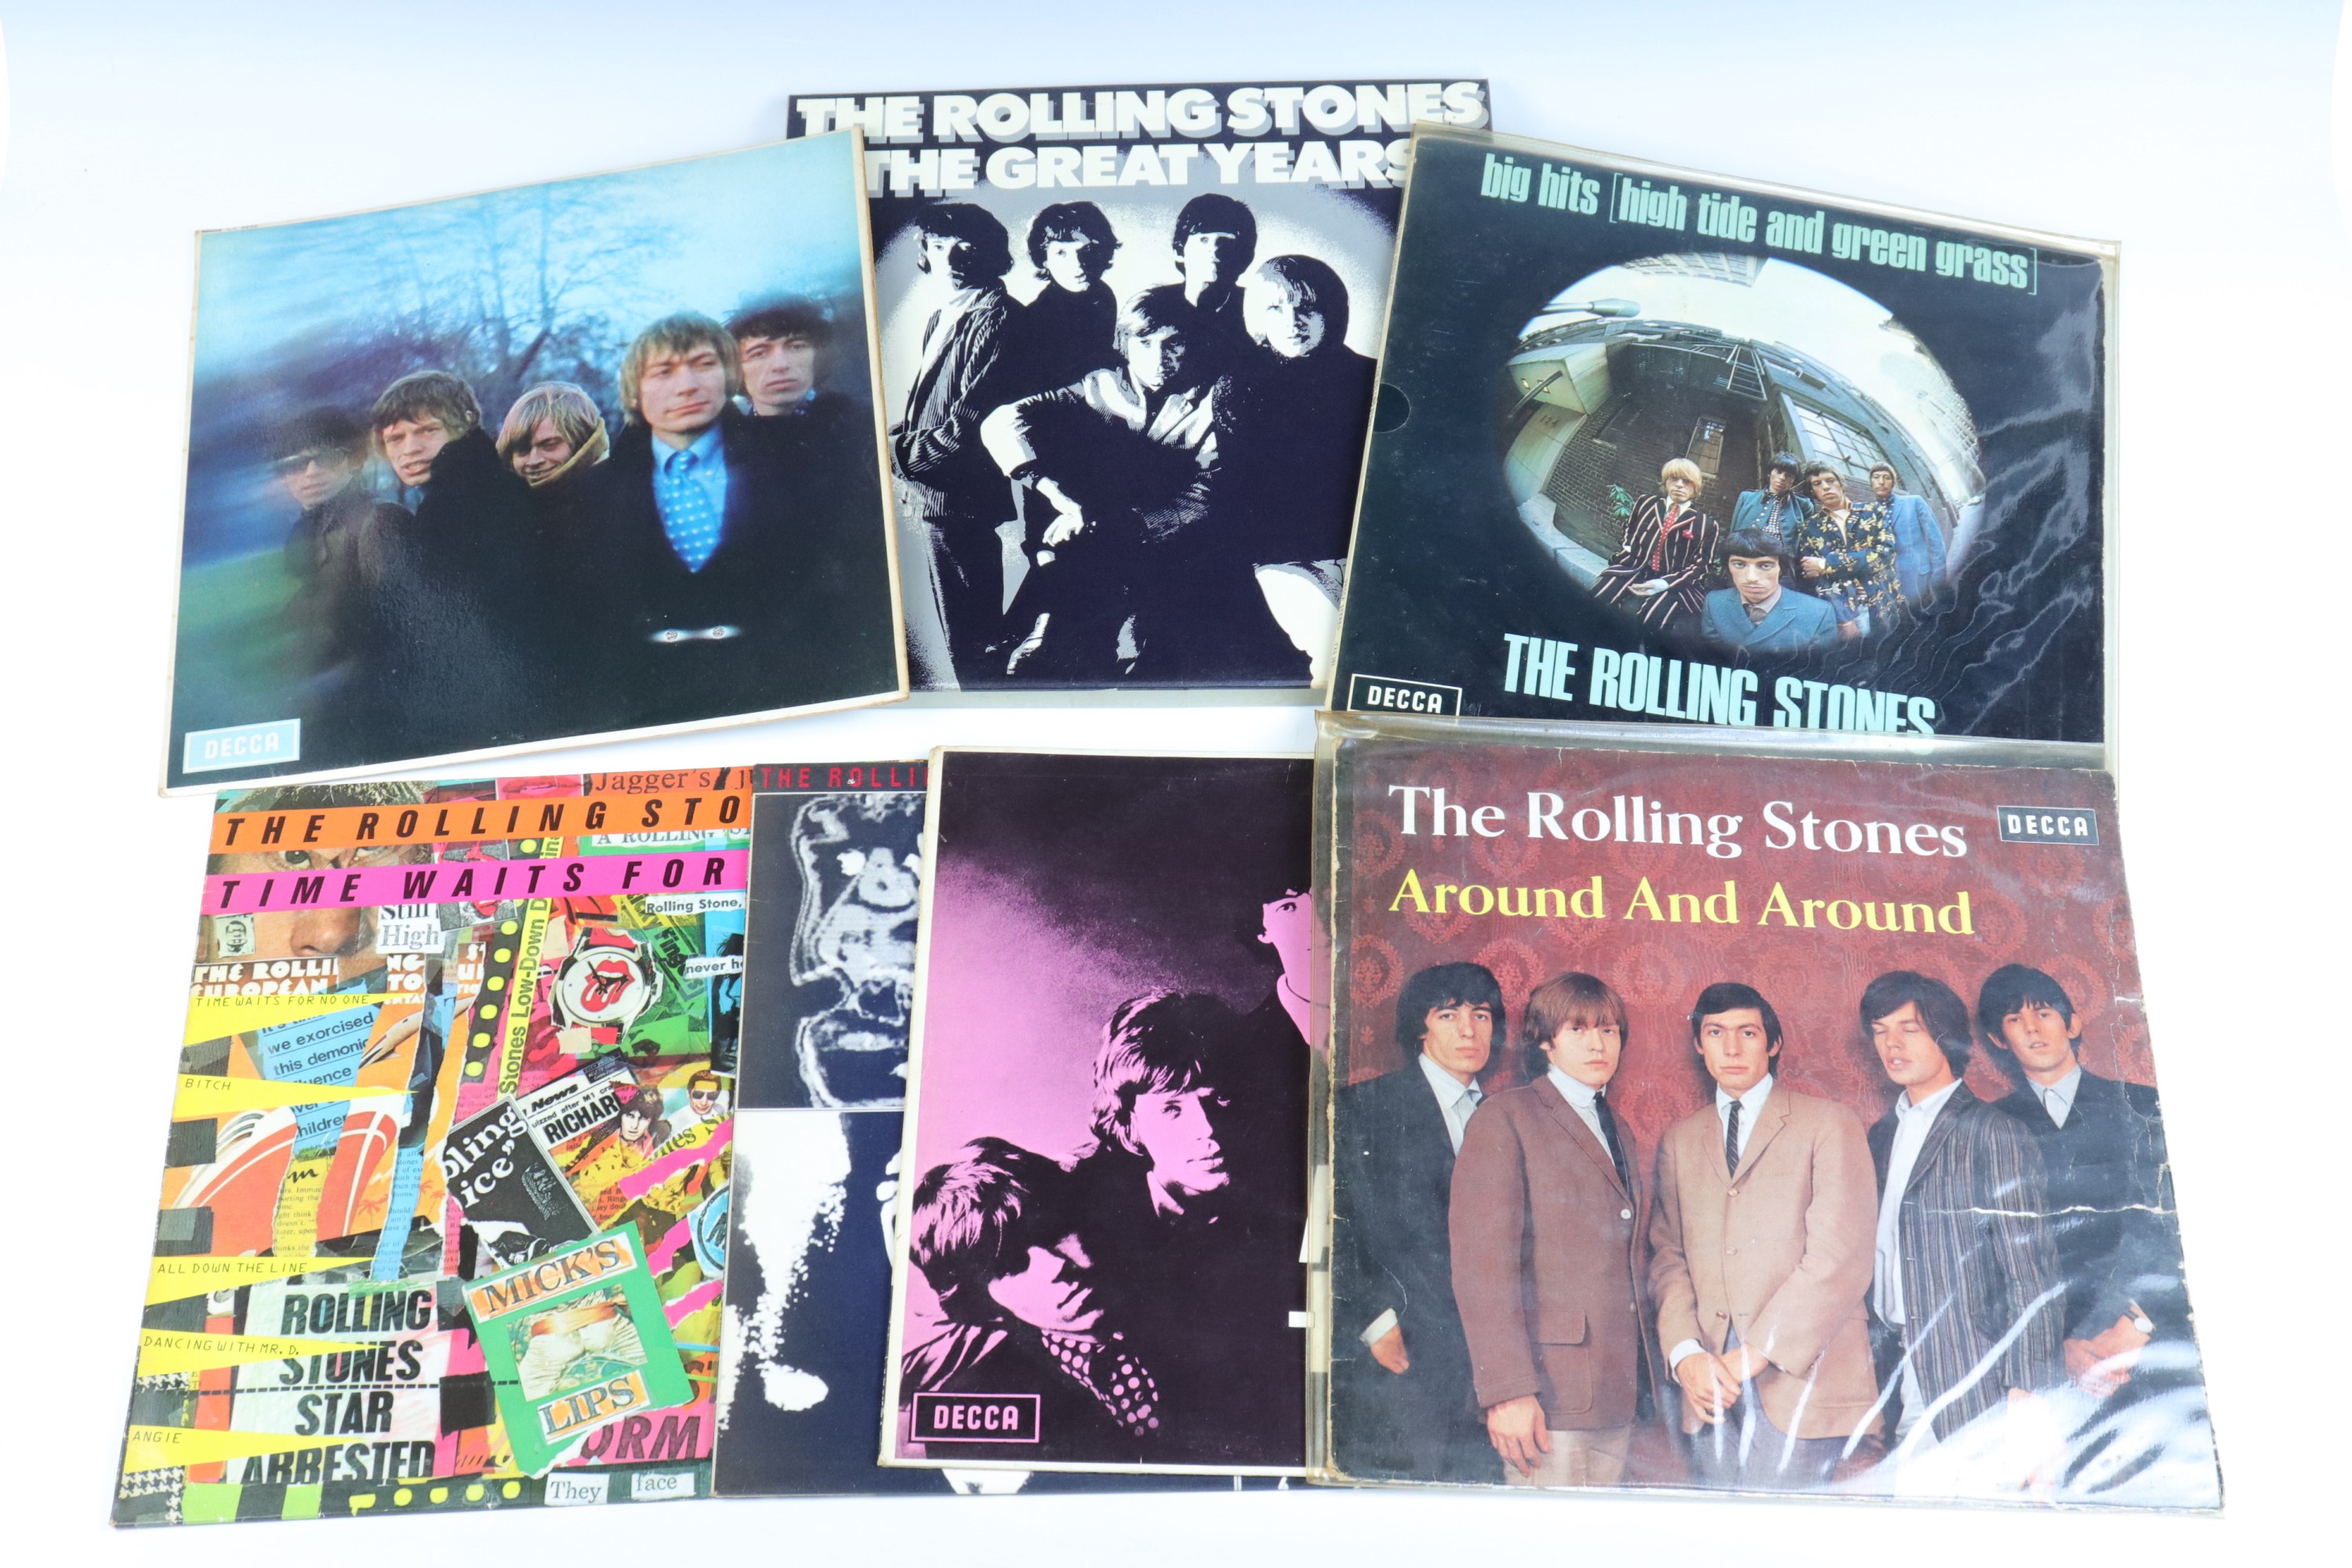 A quantity of The Rolling Stones LP records including "Between The Buttons", "Around And Around" and